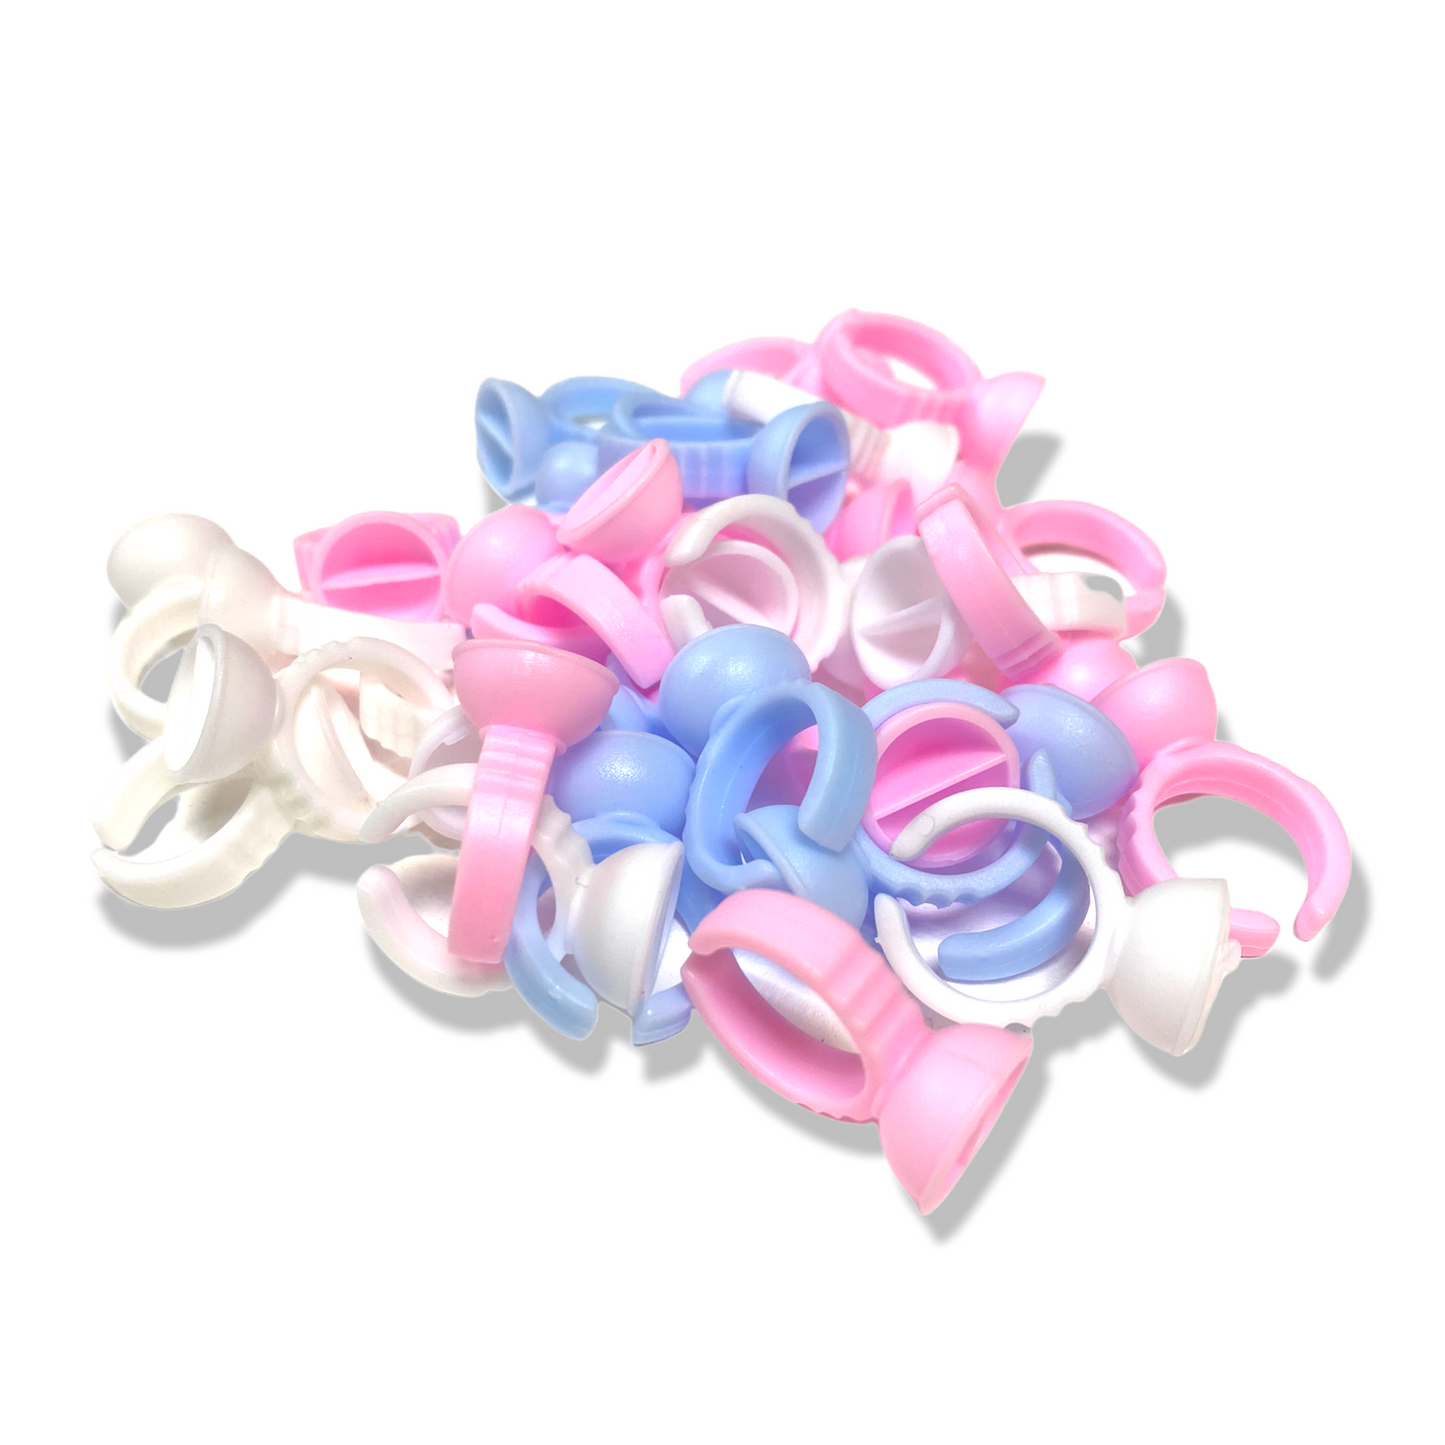 Regular Mixed Color Disposable Glue Rings  with divider